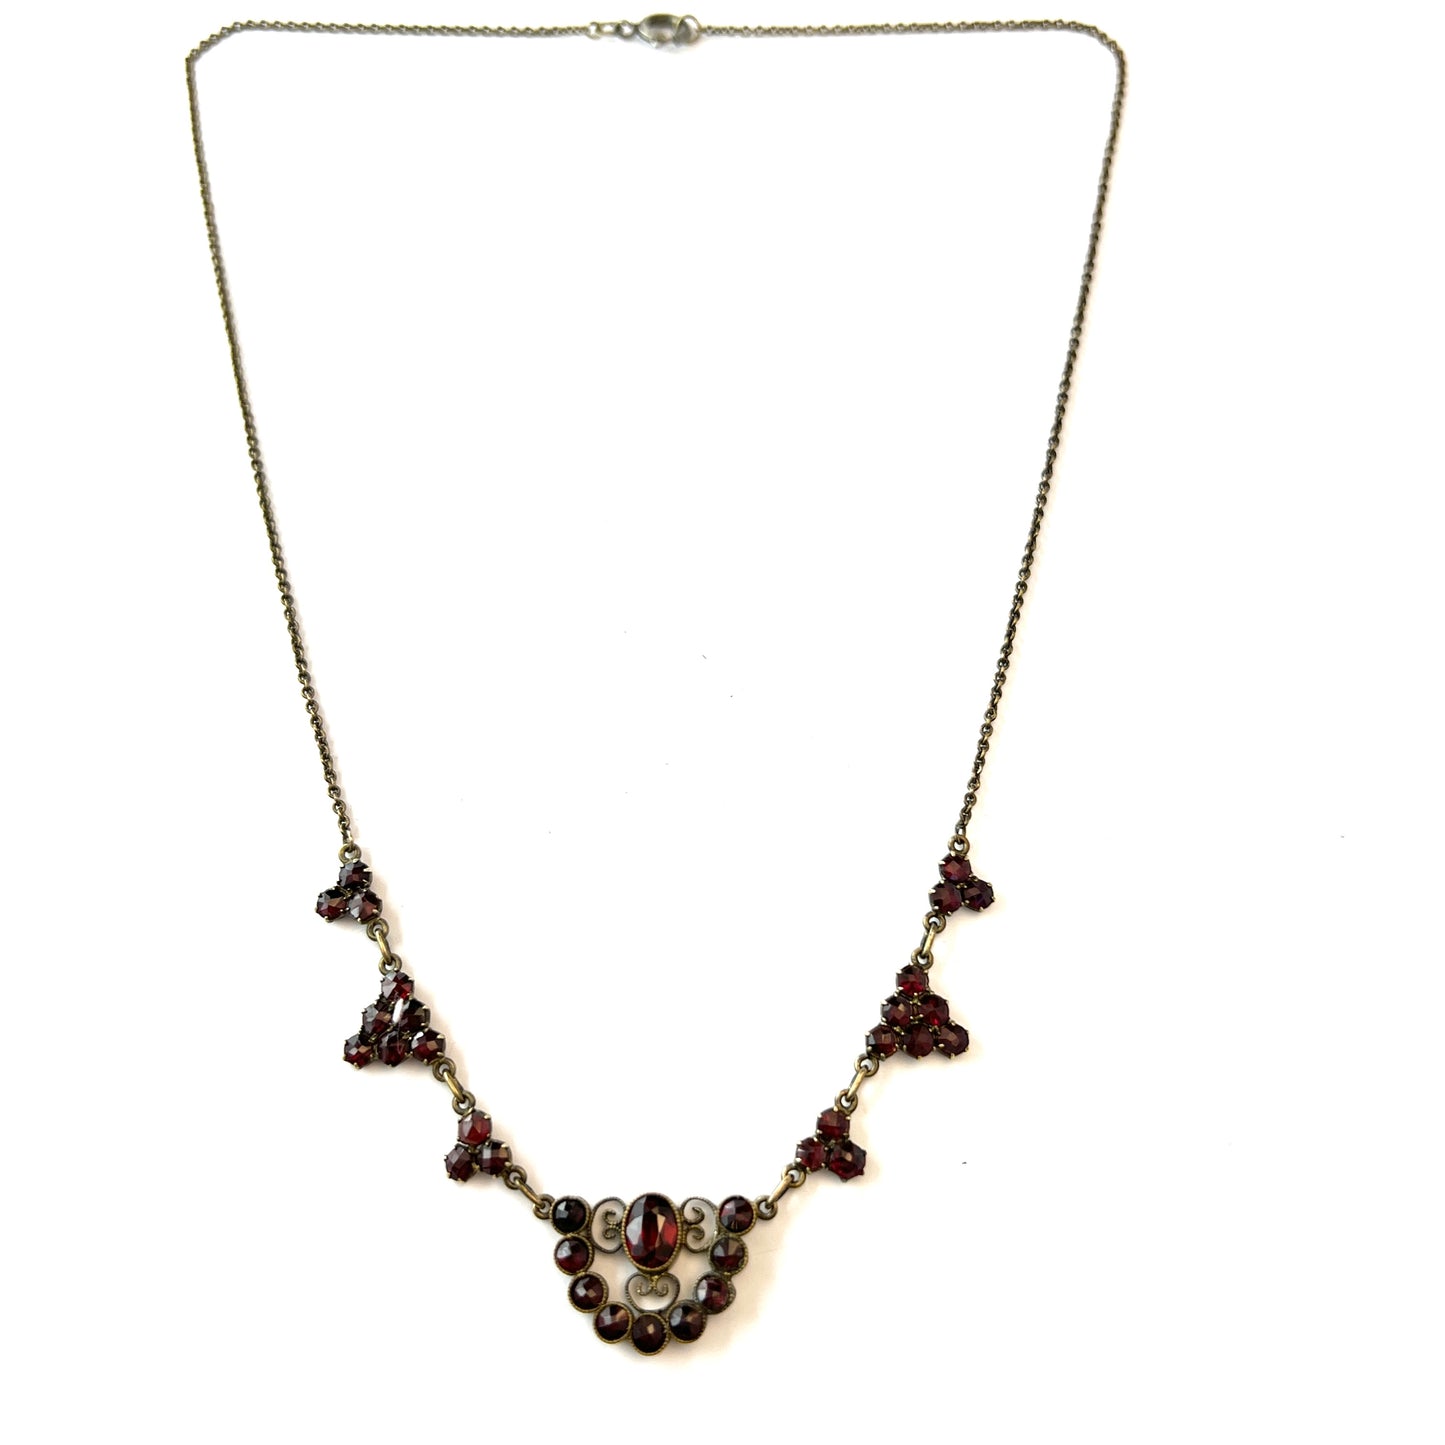 Early to Mid 1900s. Bohemian Garnet Gilt Metal Necklace. Makers Mark.